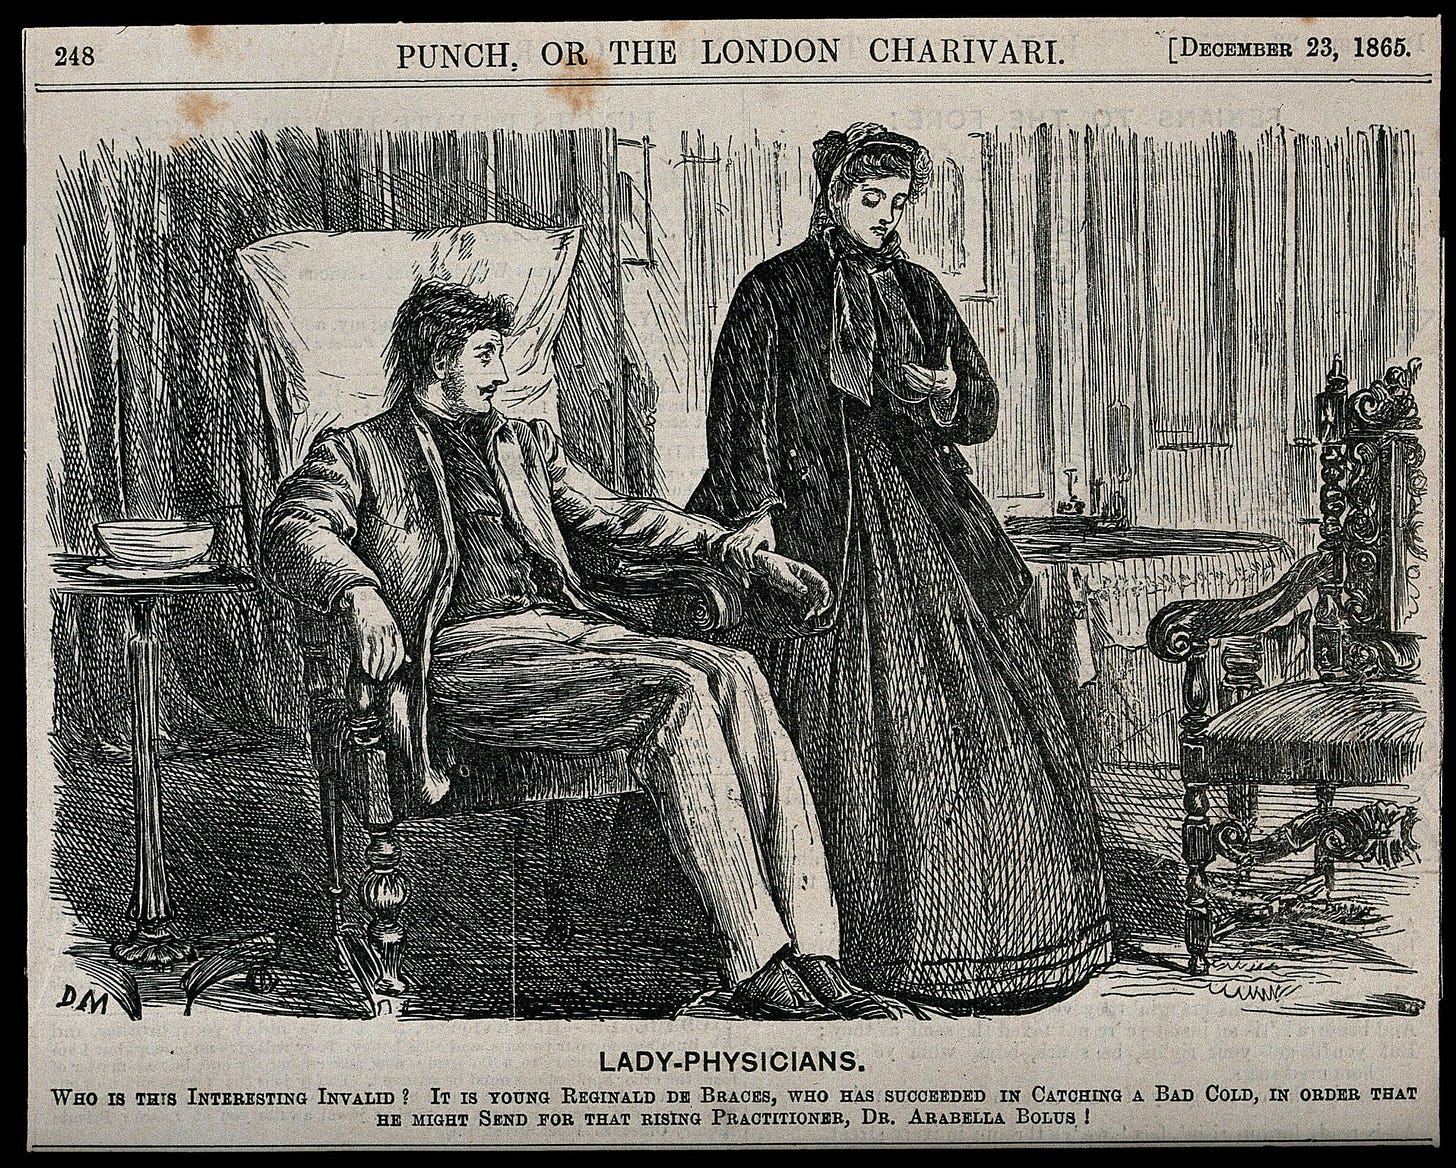 A Victorian illustration showing a female doctor standing and taking the pulse of a seated man. She is focusing on her pocket watch; he is gazing up at her. The caption explains that he has managed to catch a cold as an excuse to consult her.